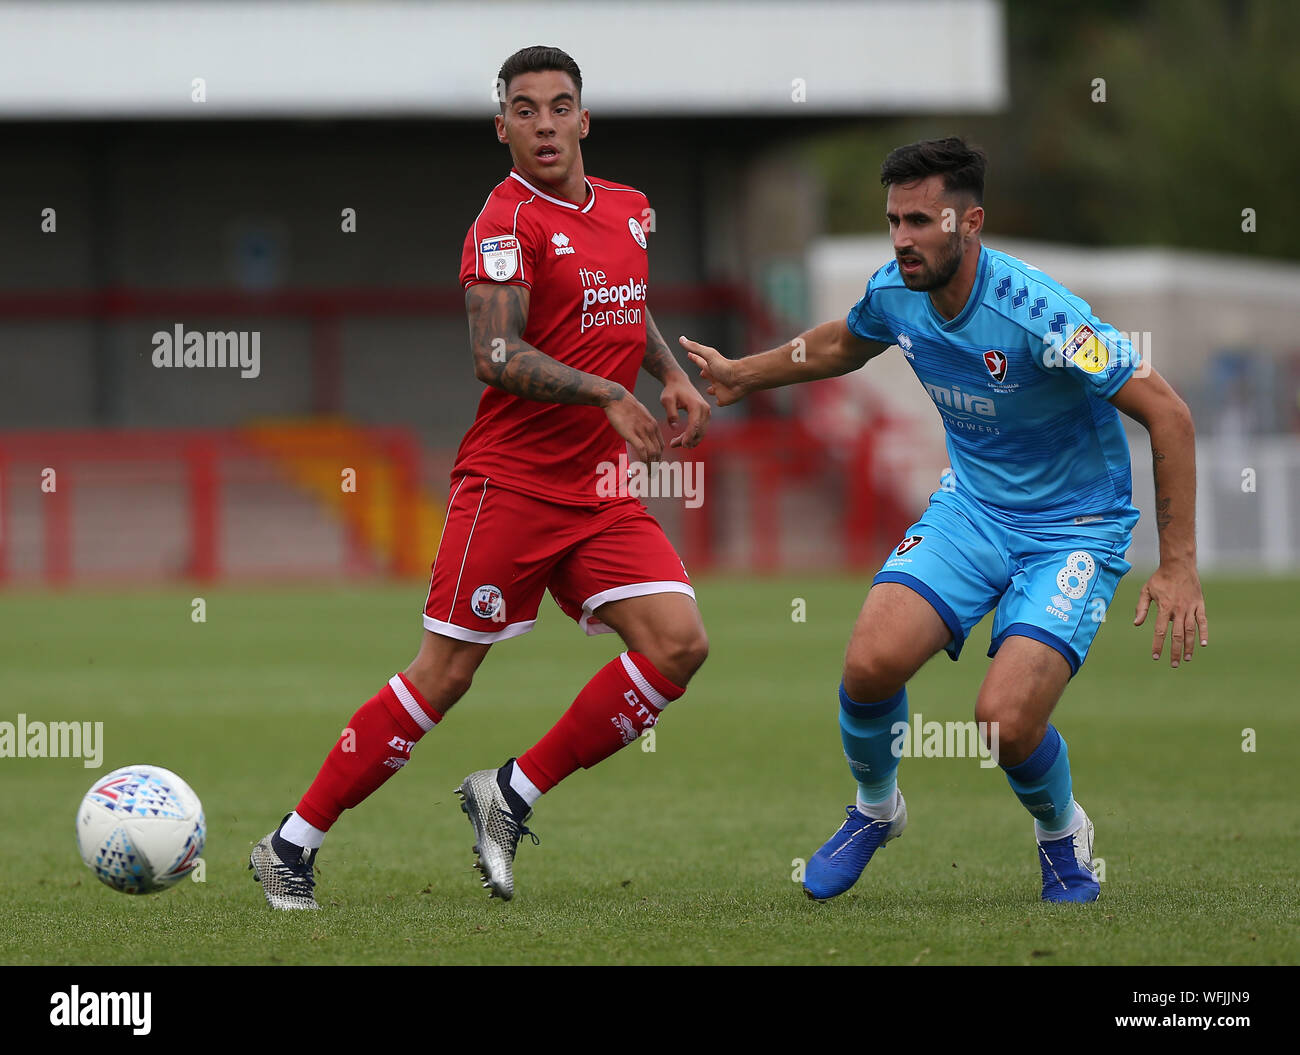 Crawley, UK. 31 August 2019 Crawley Town's Reece Grego-Cox  and Cheltenham's Chris Clements during the Sky Bet League One match between Crawley Town and Cheltenham Town at the Peoples Pension Stadium in Crawley. Credit: Telephoto Images / Alamy Live News Stock Photo